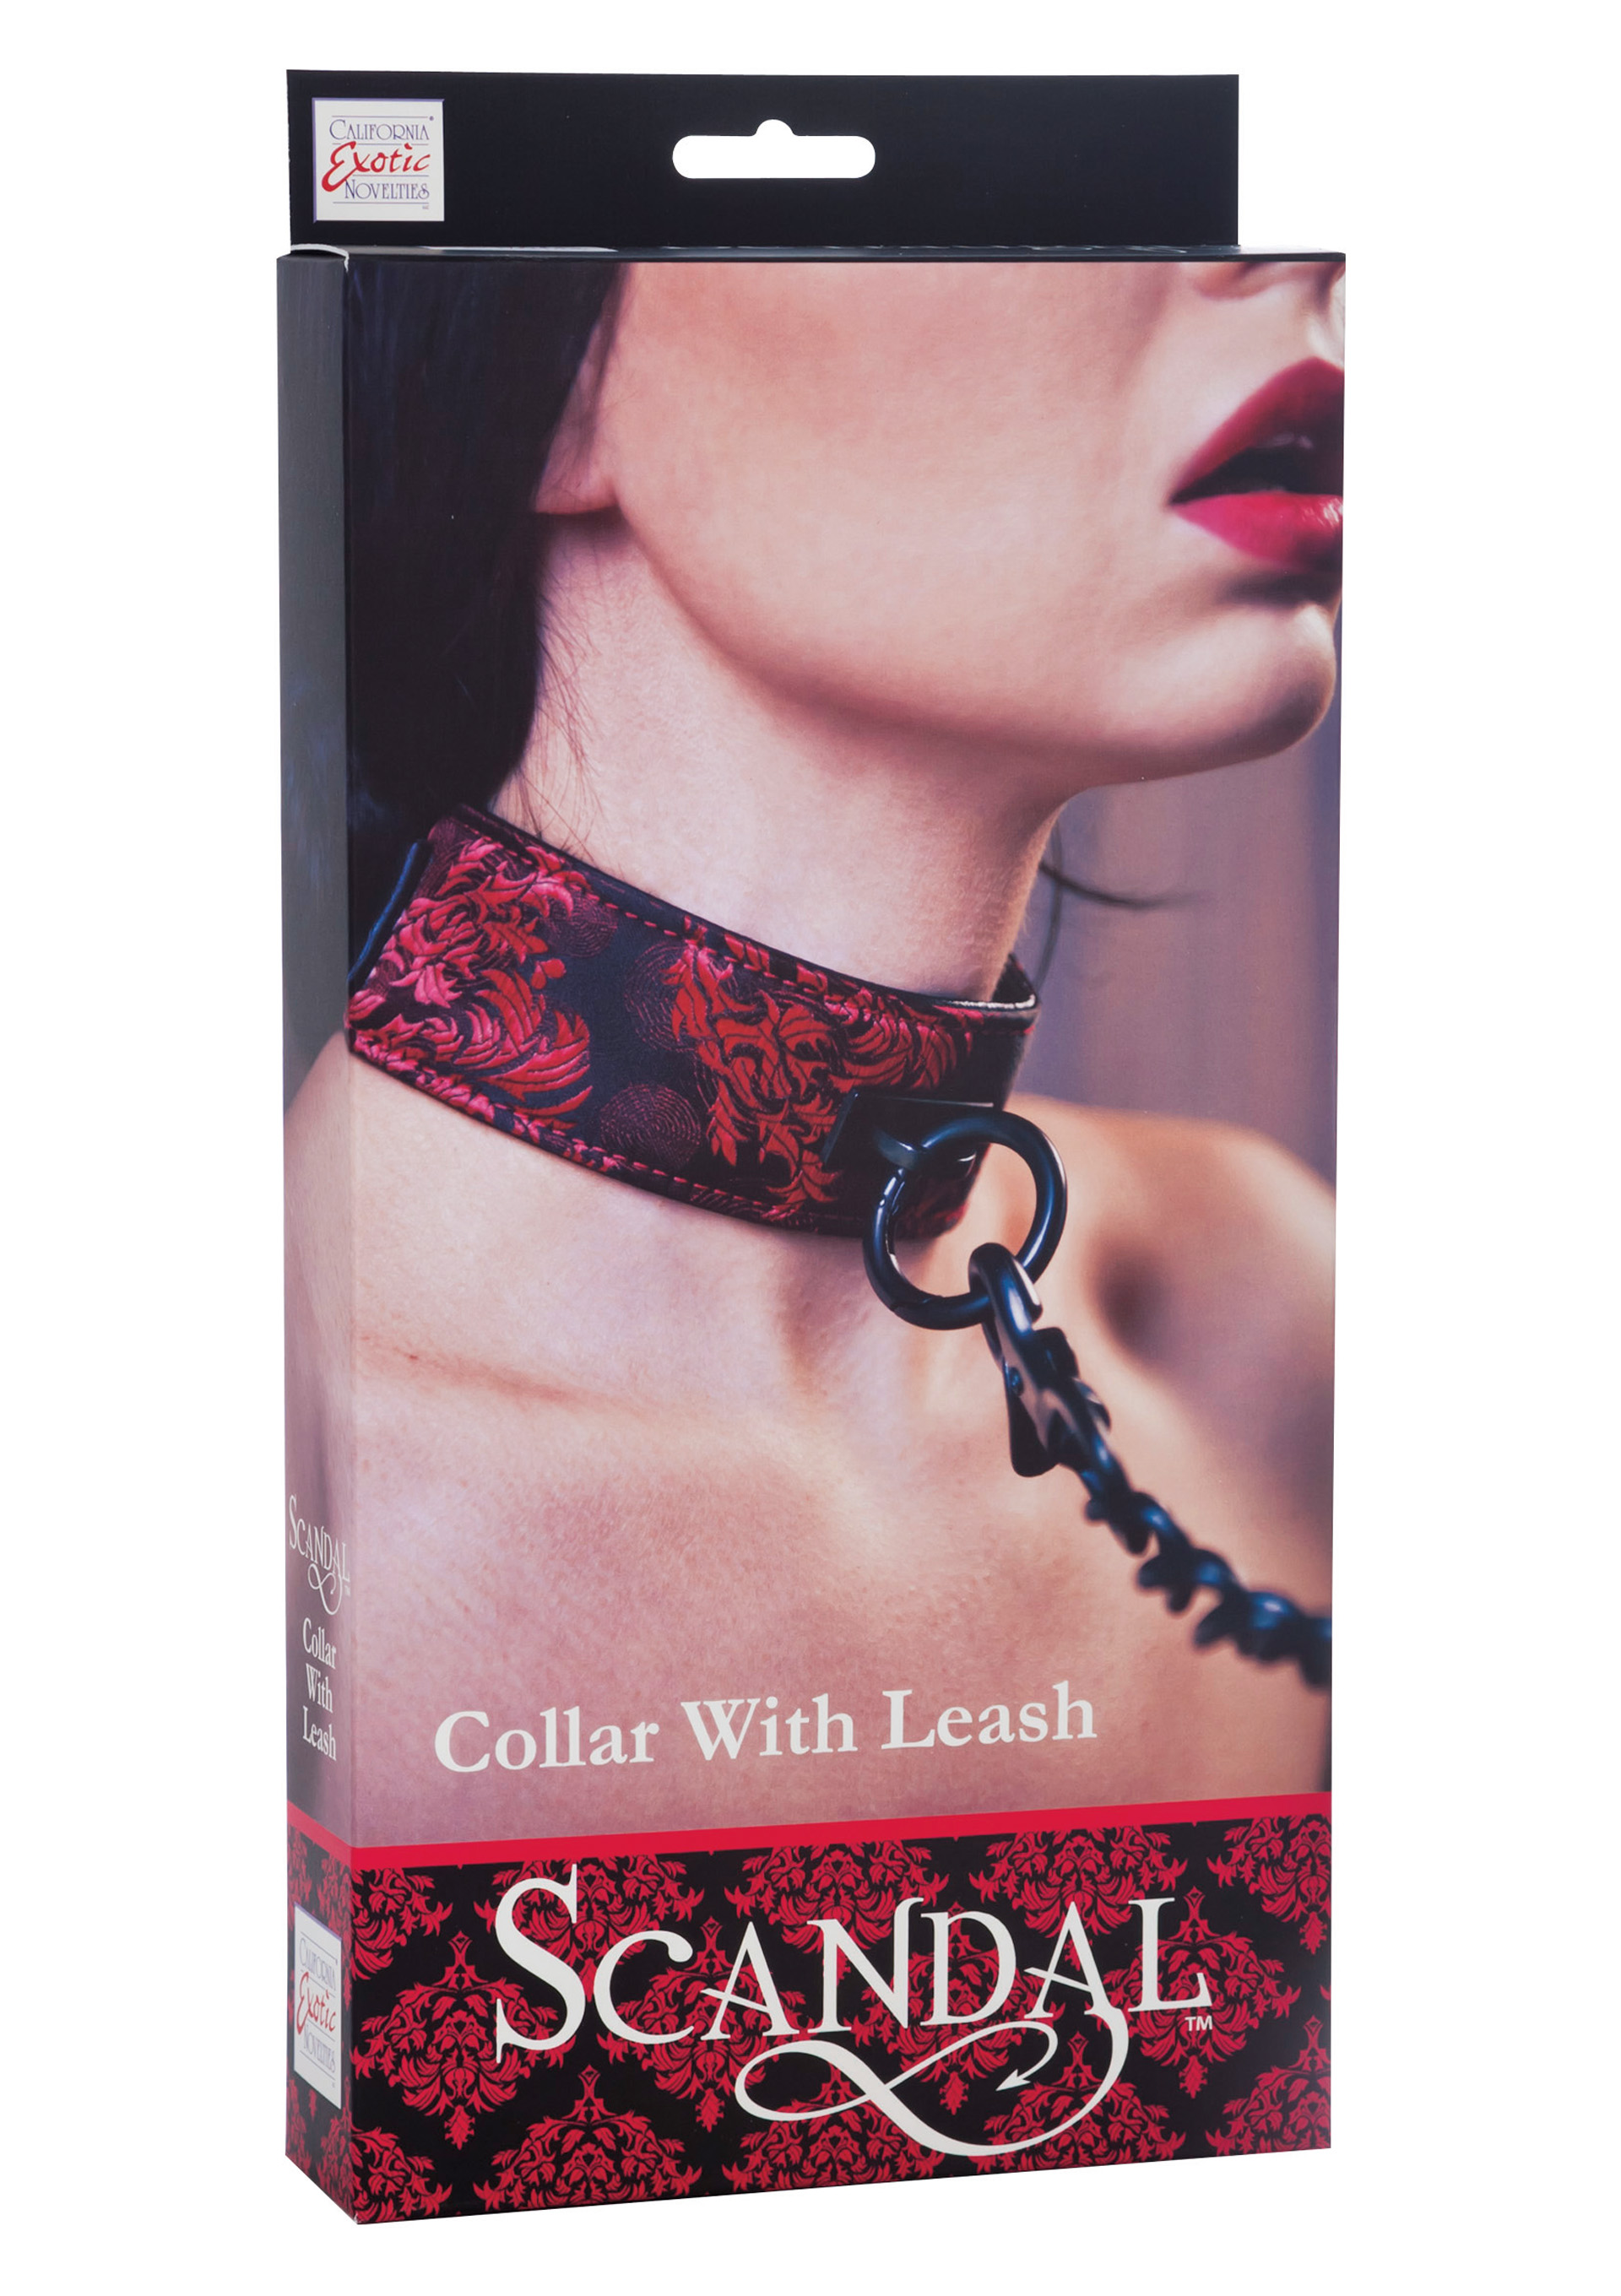 Scandal Collar with Leash.